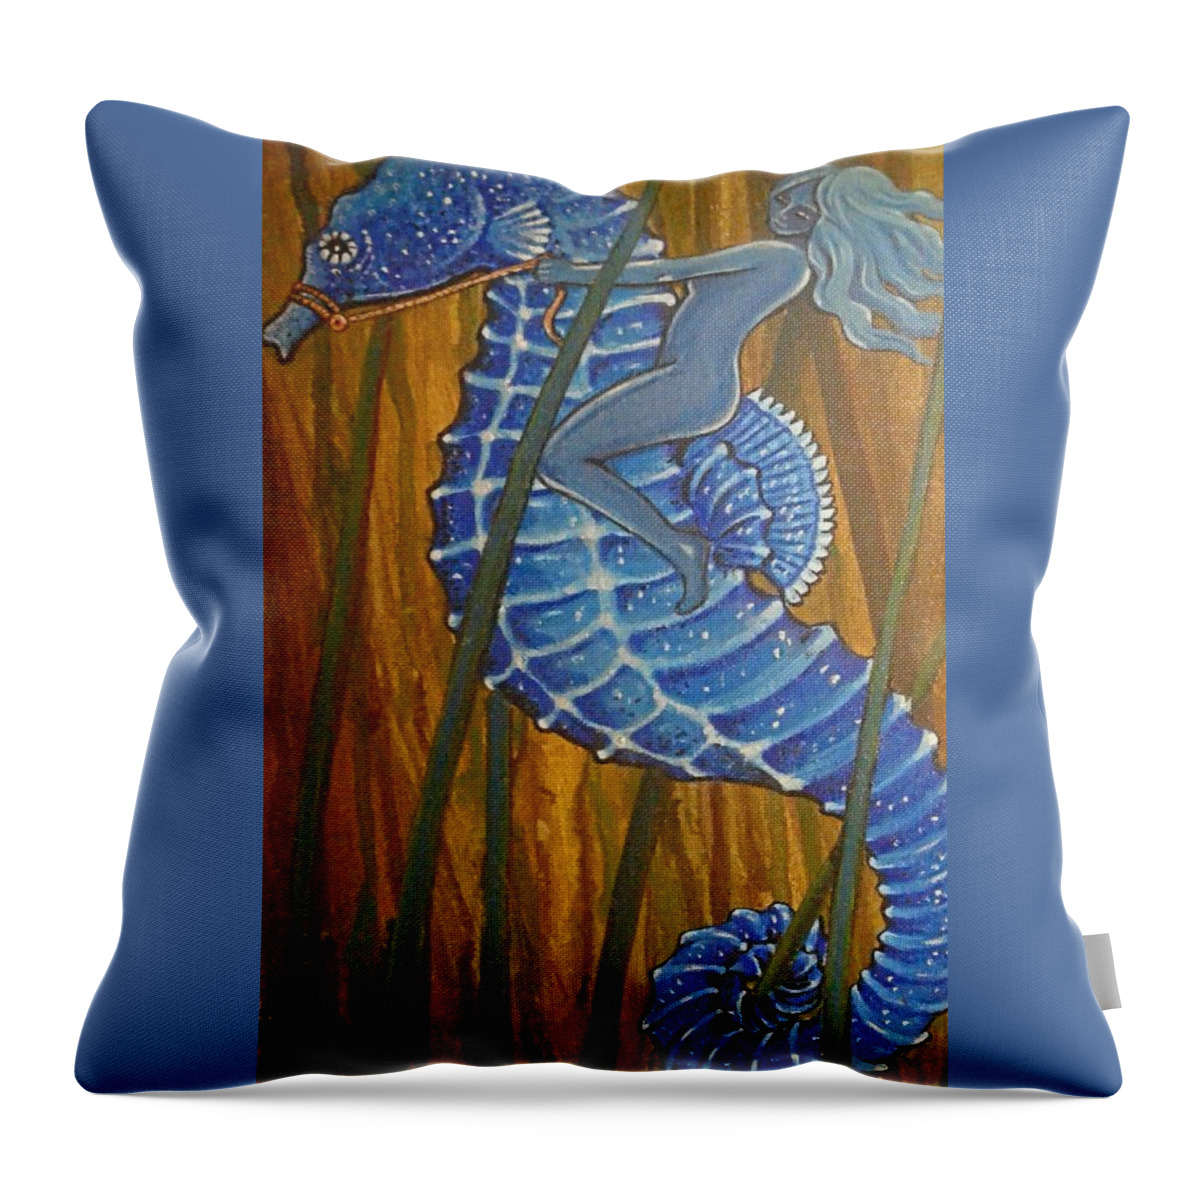 Seahorse Throw Pillow featuring the painting Blue Seahorse Rider of Near by James RODERICK